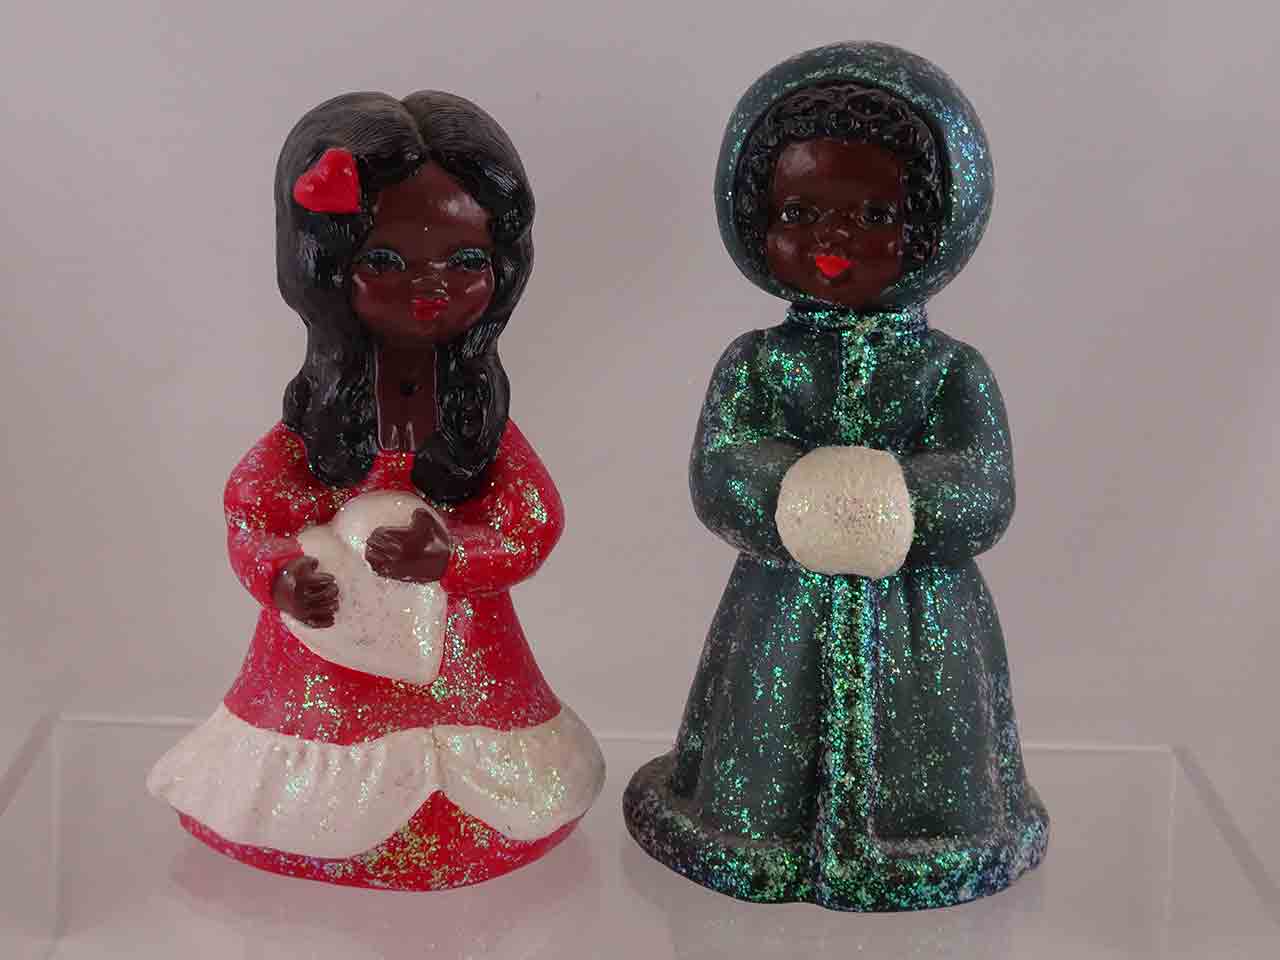 Girls of the month by Jean Grief - salt and pepper shakers